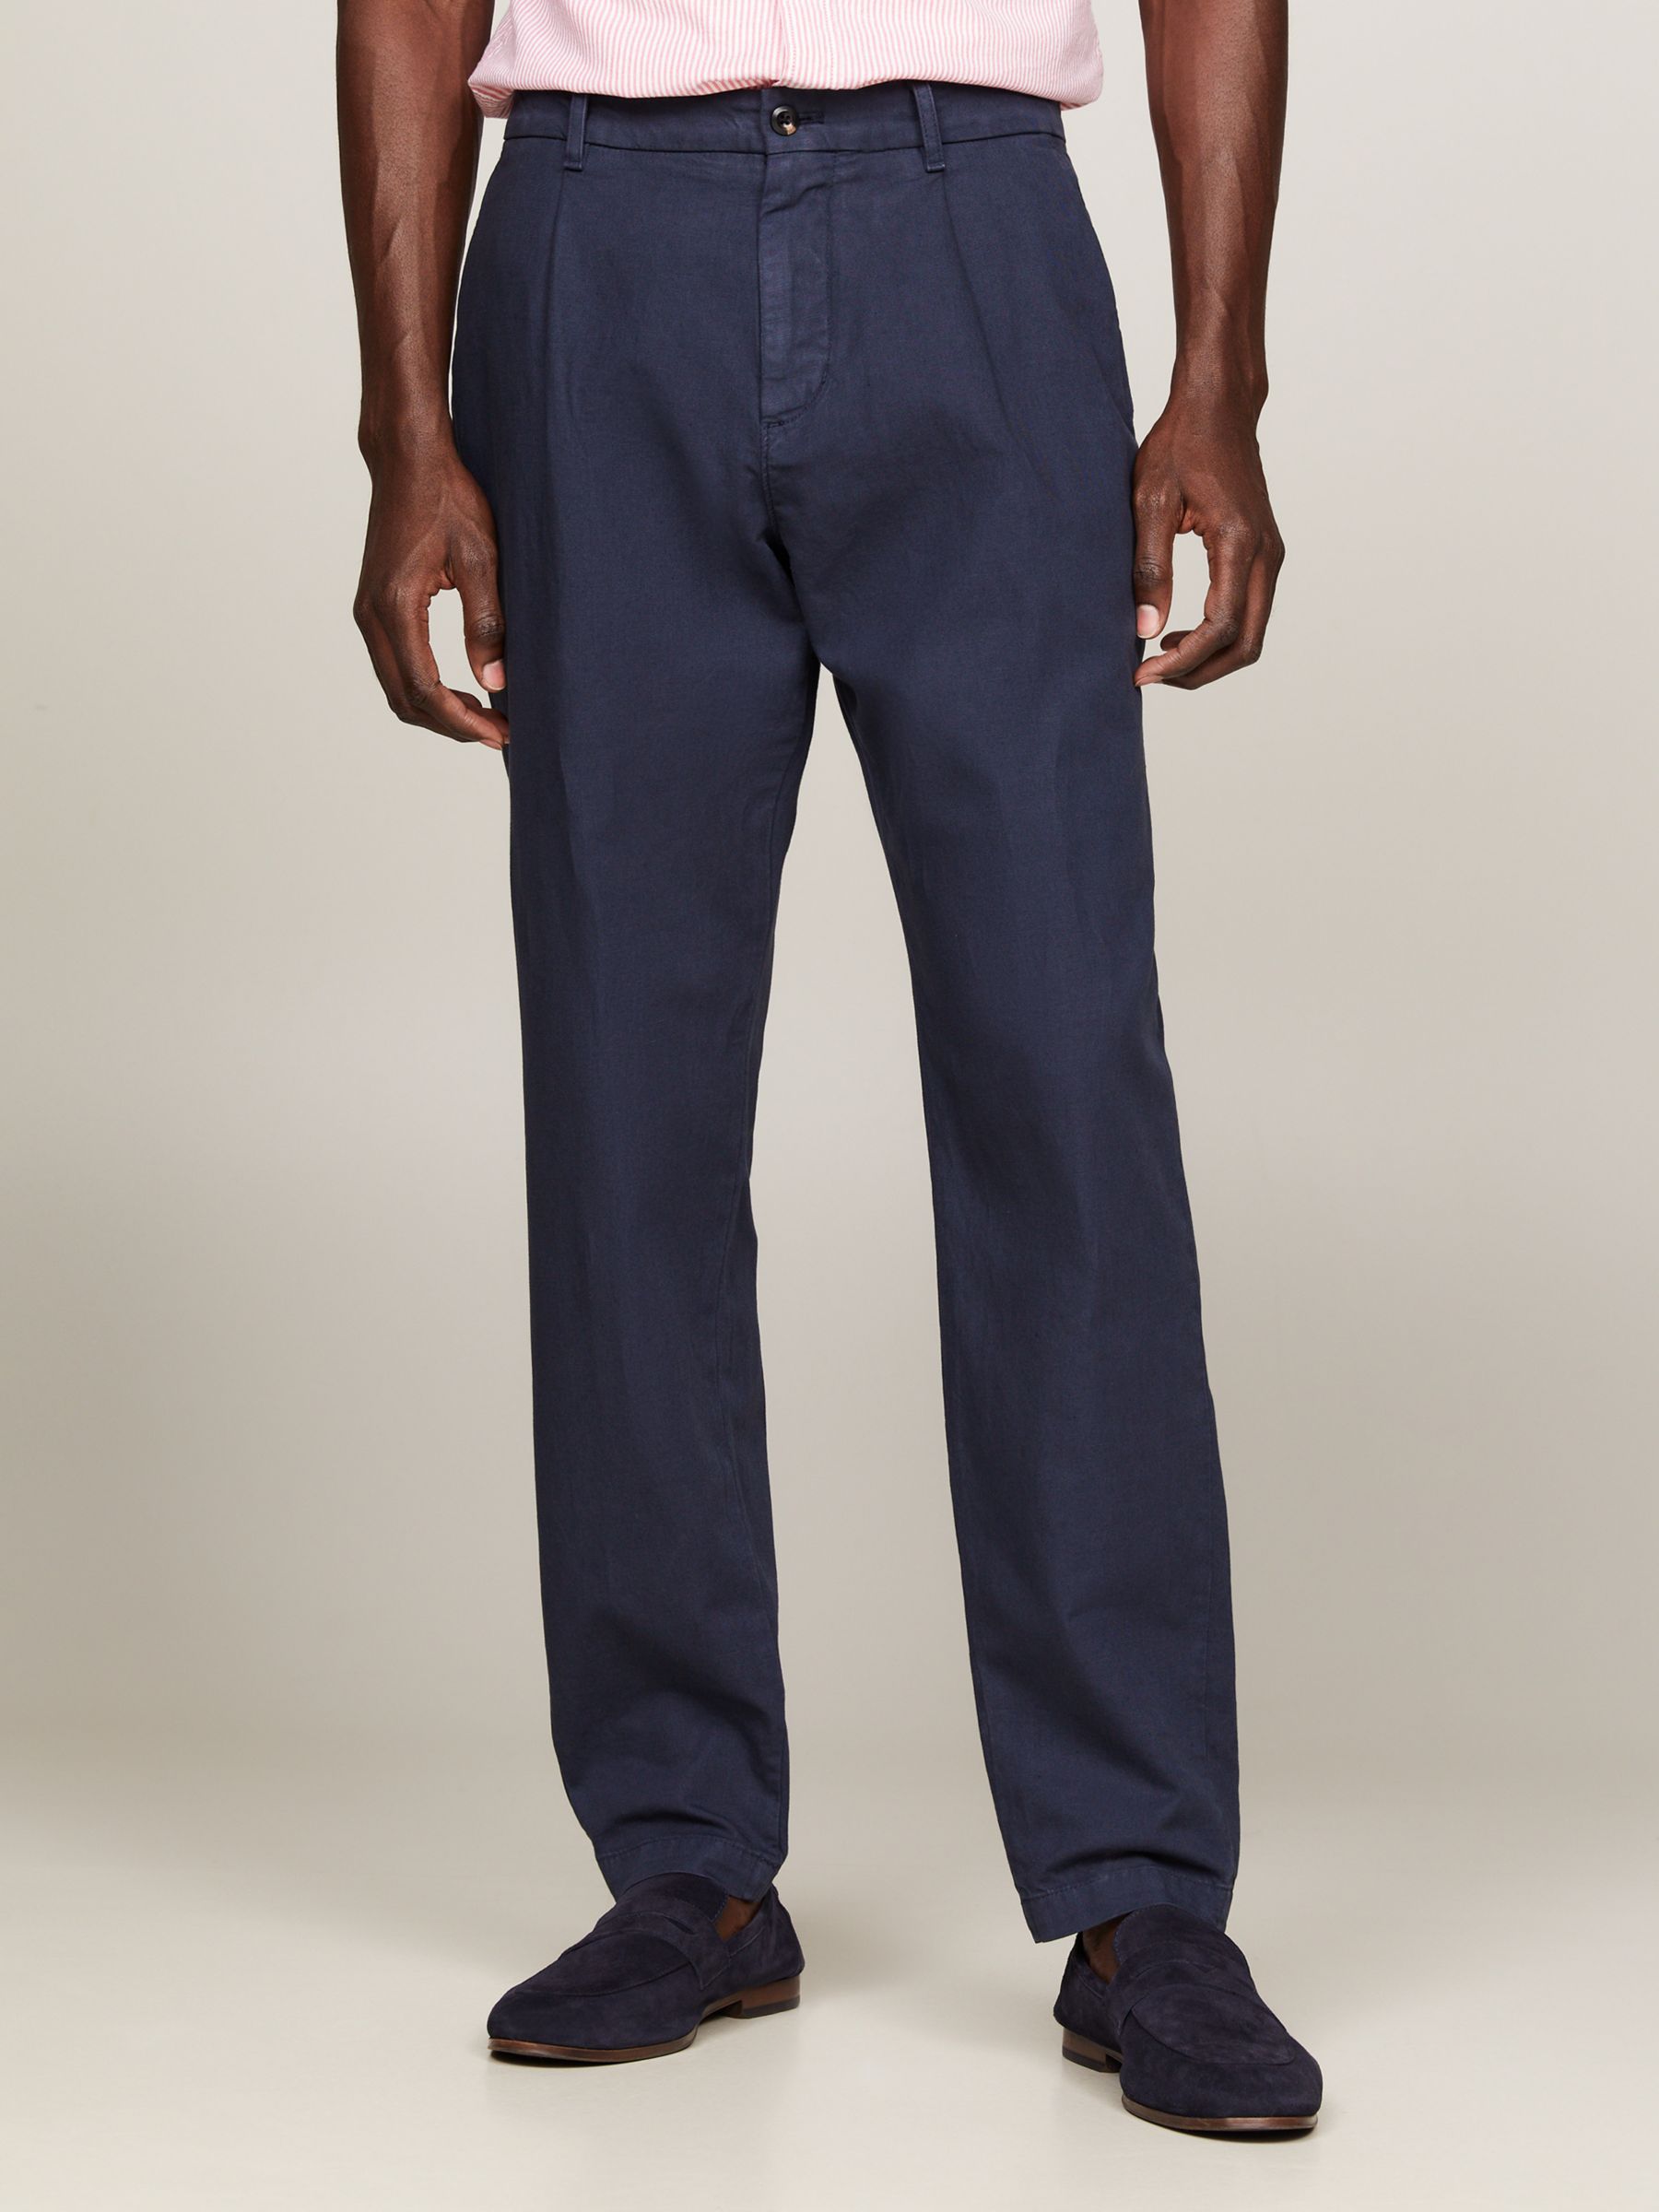 Tommy Hilfiger Harlem Chino Trousers, Desert Sky, 30R